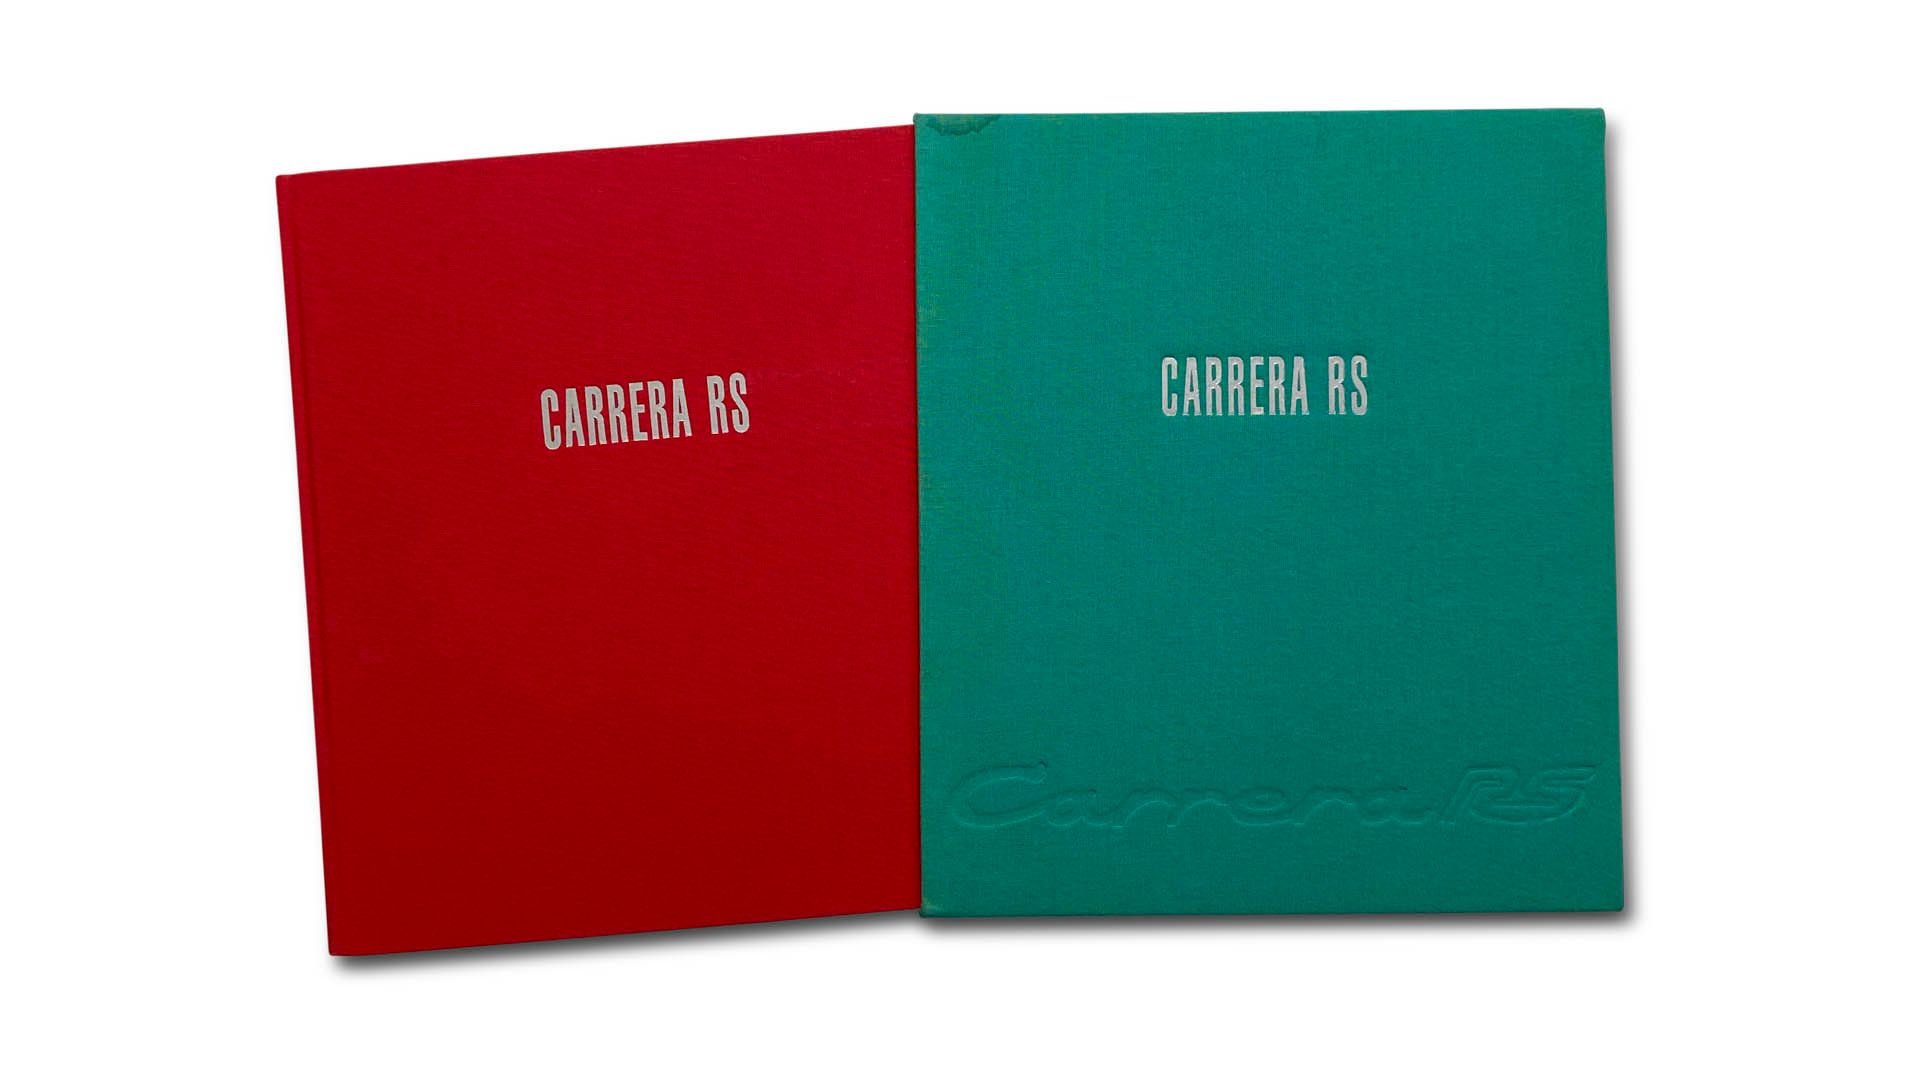 Broad Arrow Auctions | Carrera RS 'Das Buch' First Edition (English, 1992) including all three marketing pieces